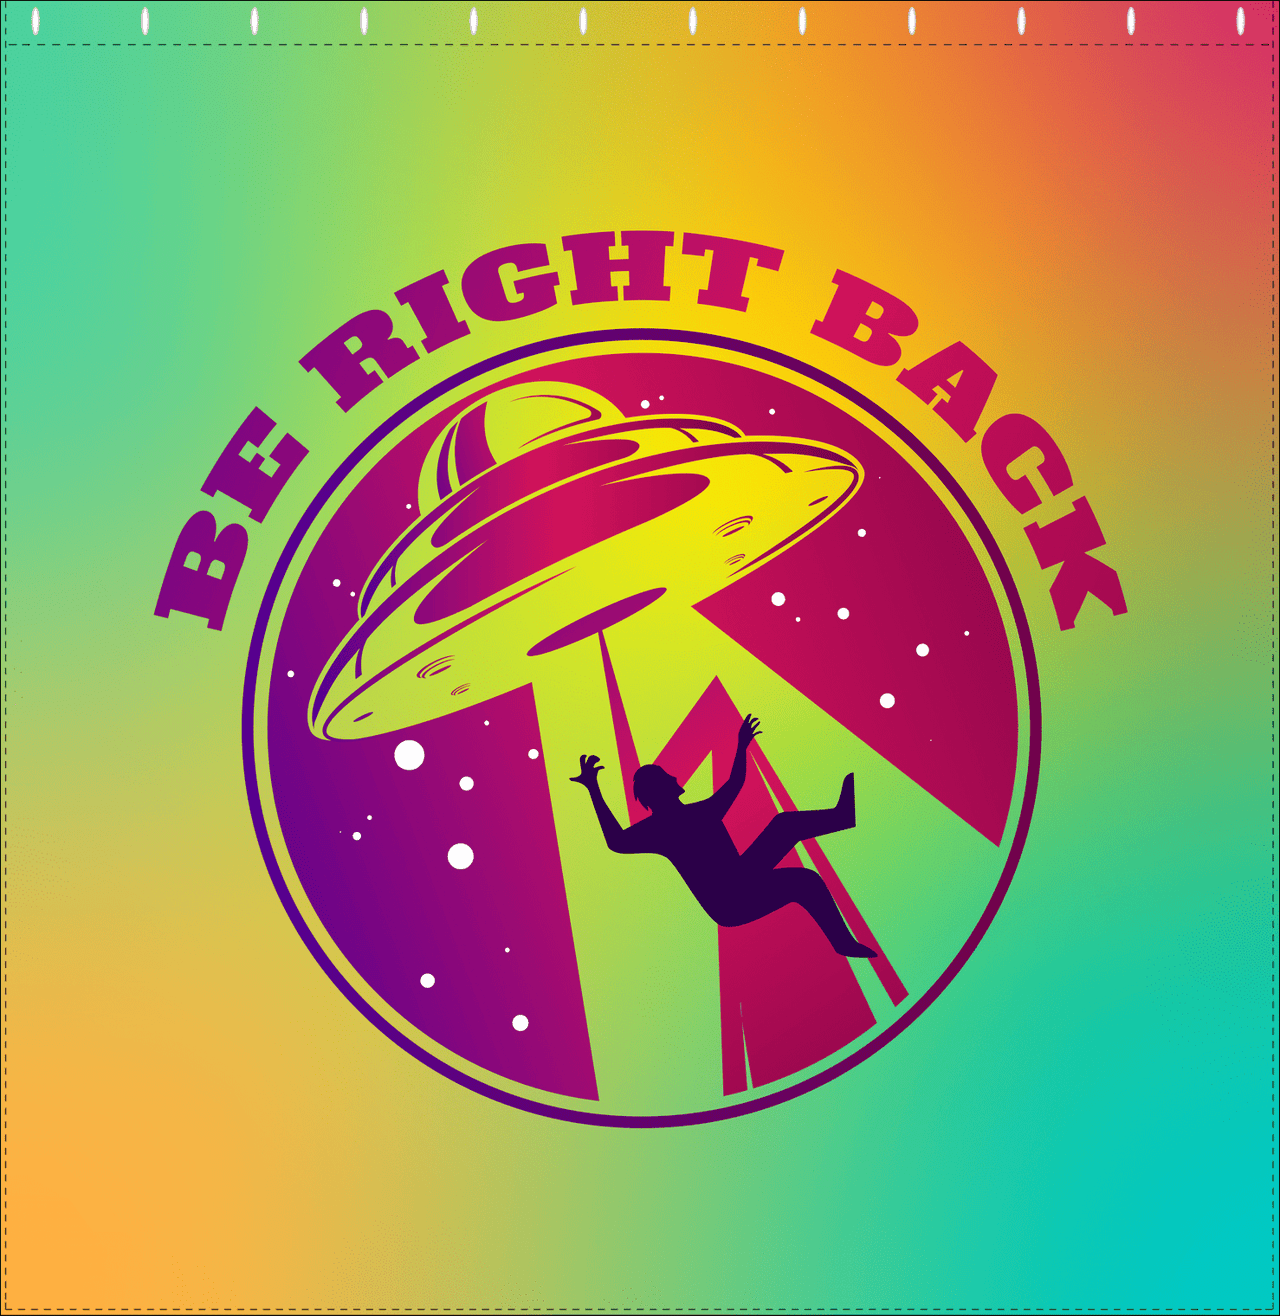 Aliens / UFO Shower Curtain - Be Right Back - Decorate View